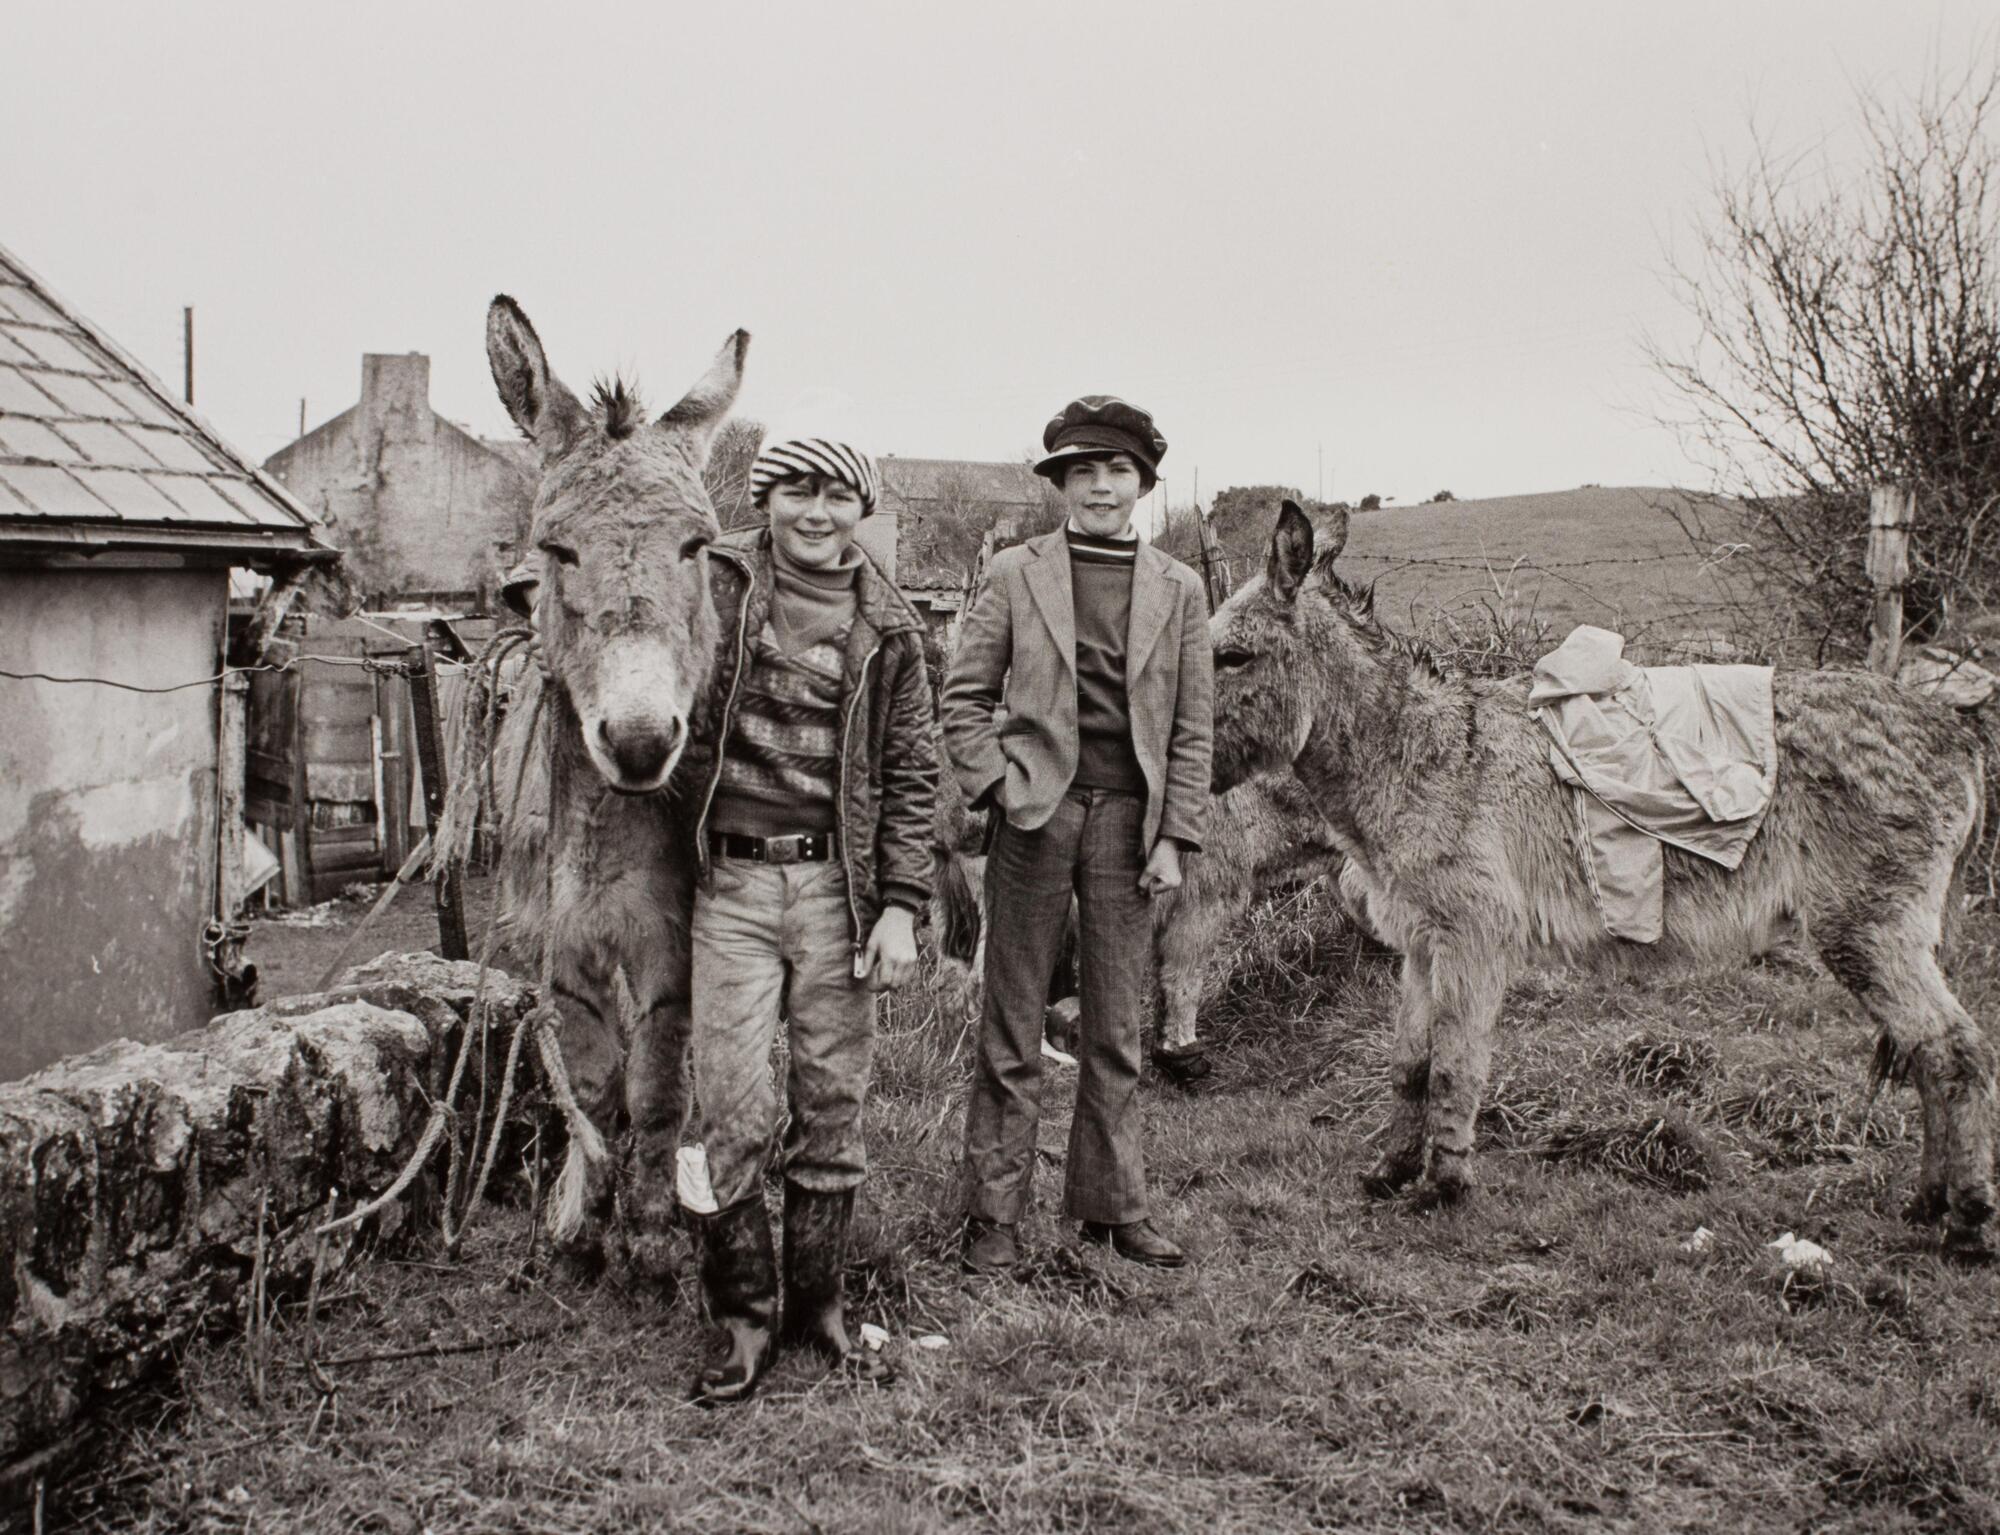 Two young boys standing next to two donkeys in a field next to a few small shacks.